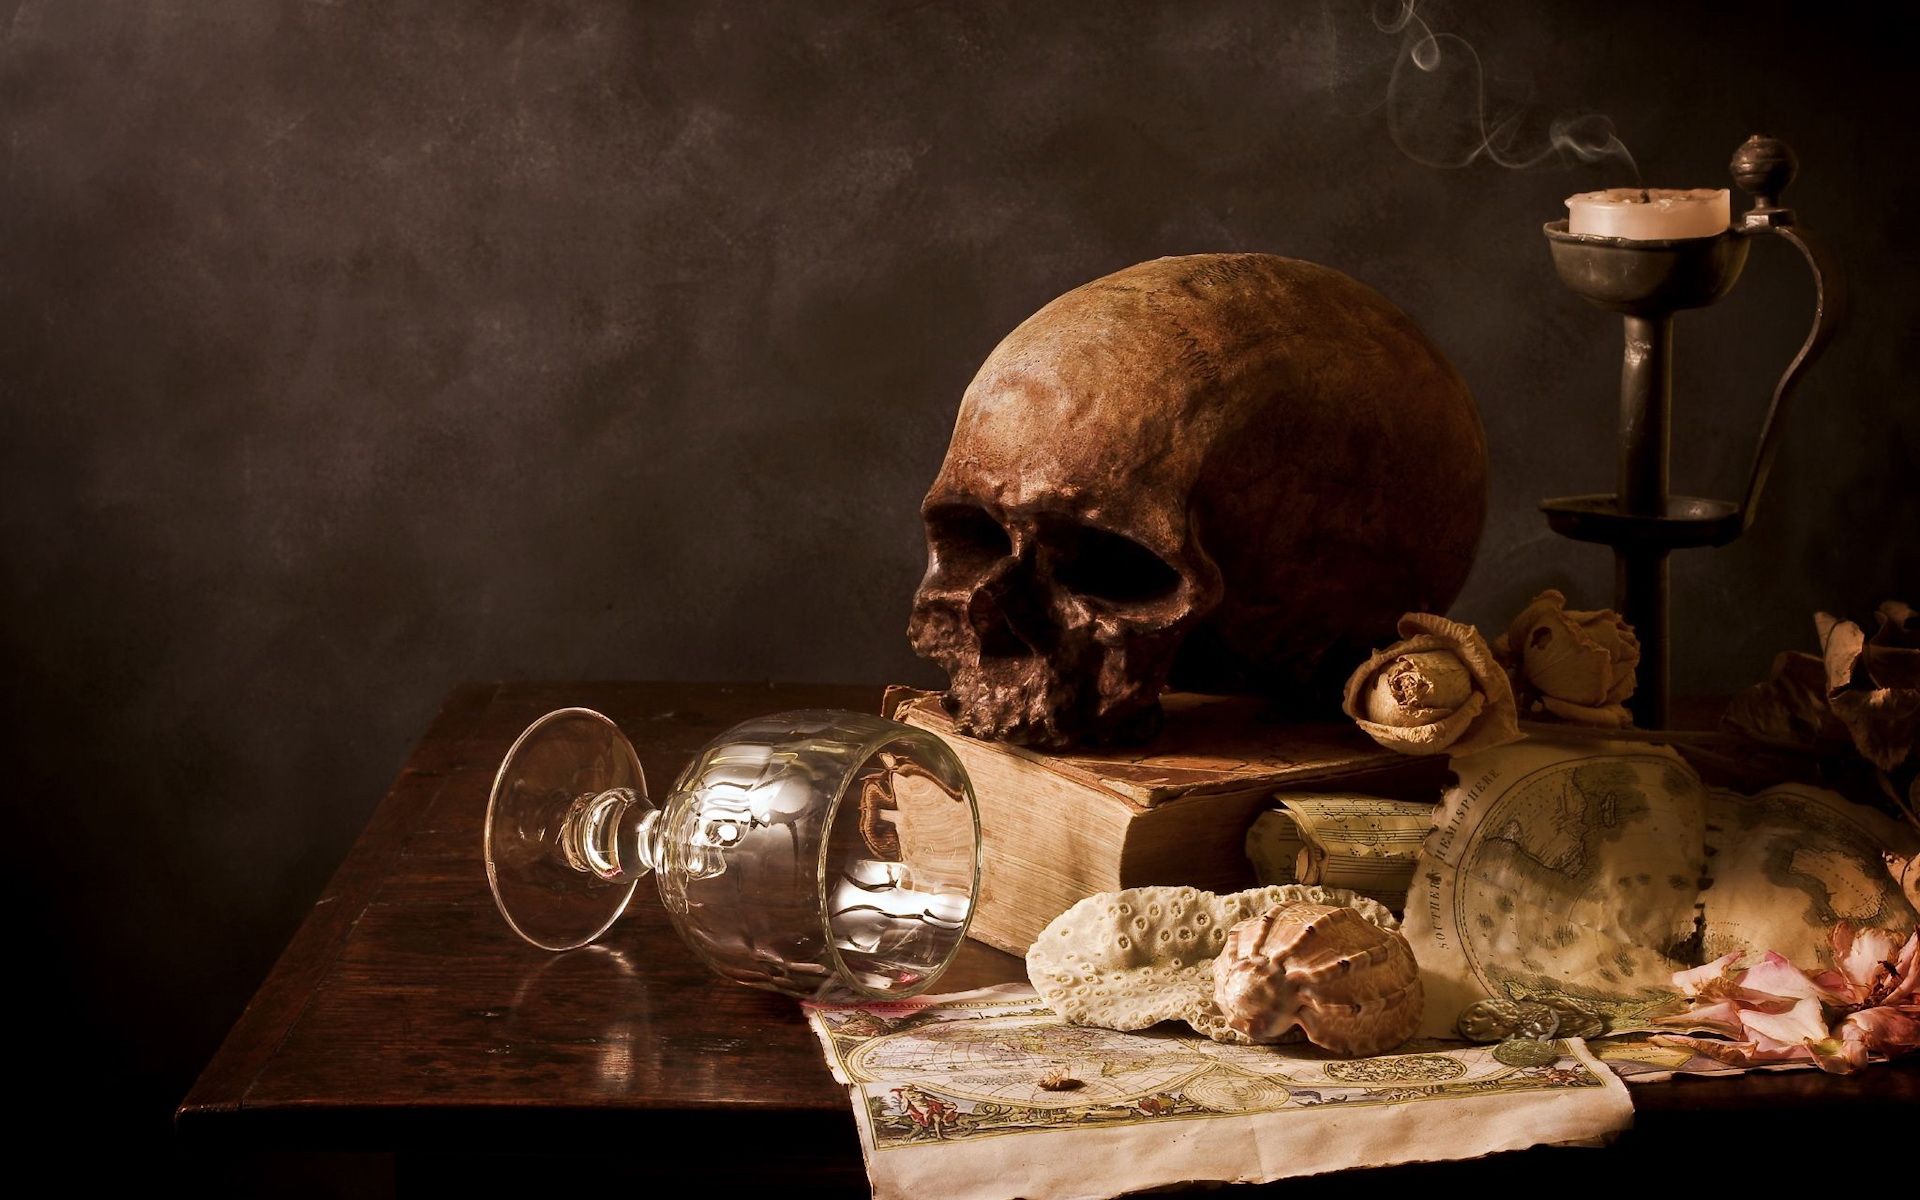 A skull and other items are on the table - Pirate